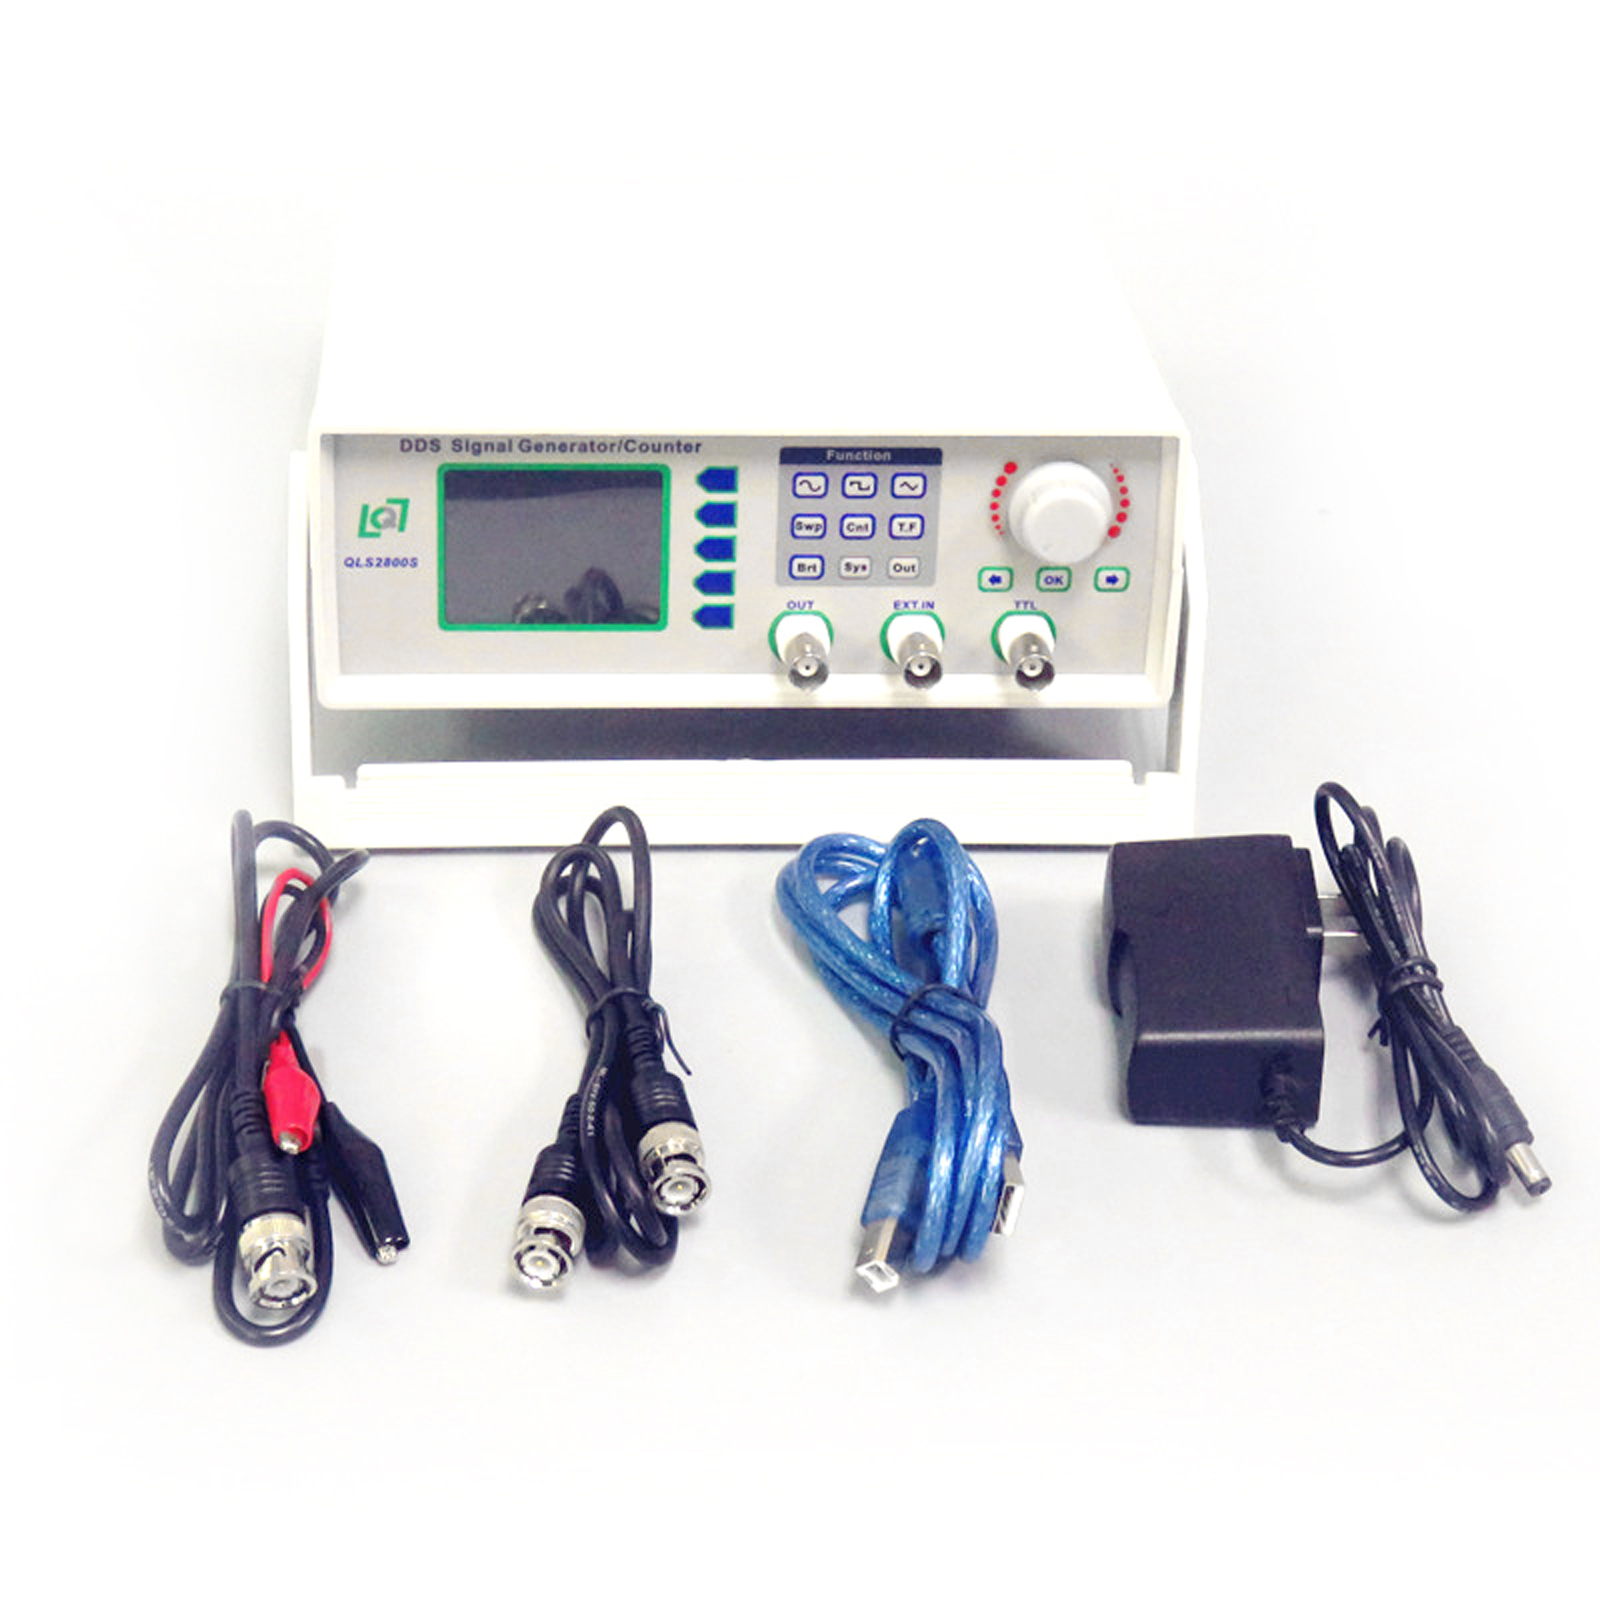 QLS2802S-2M/QLS805S-5M Function Signal Generator / Signal Source / Frequency Indicator / Counter / Pulser